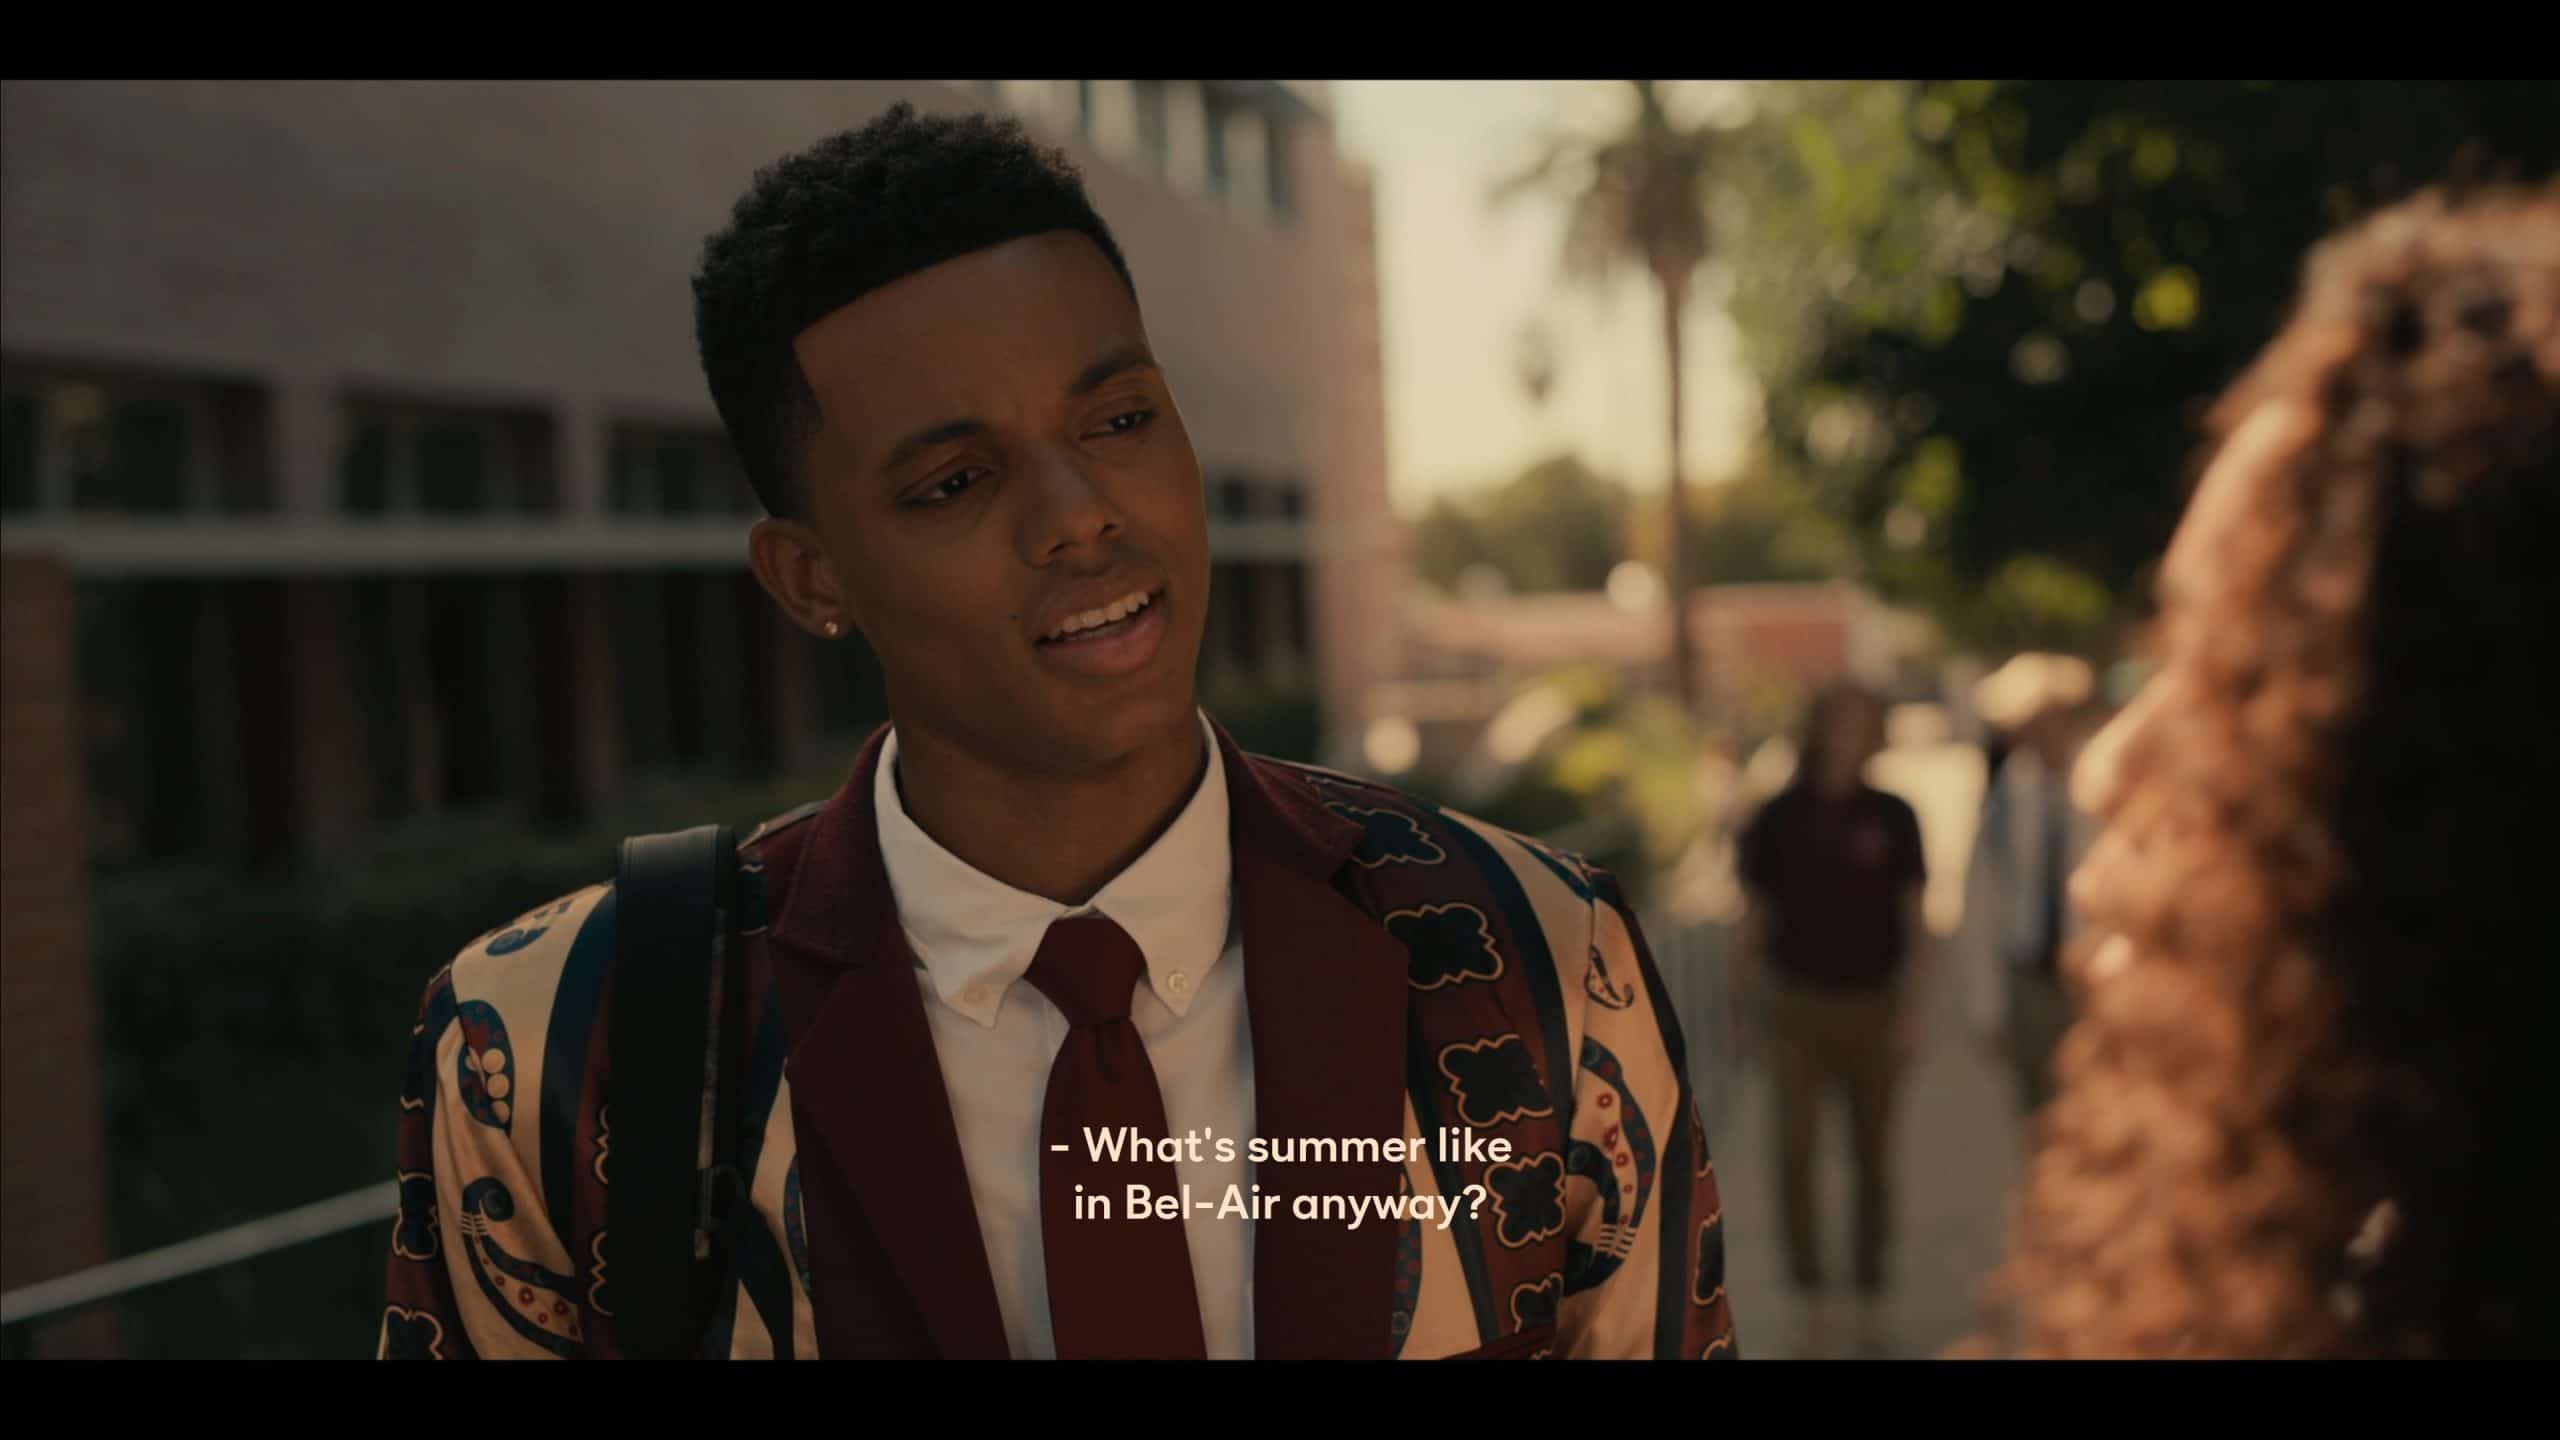 Will (Jabari Banks) asking what summers are like in Bel-Air